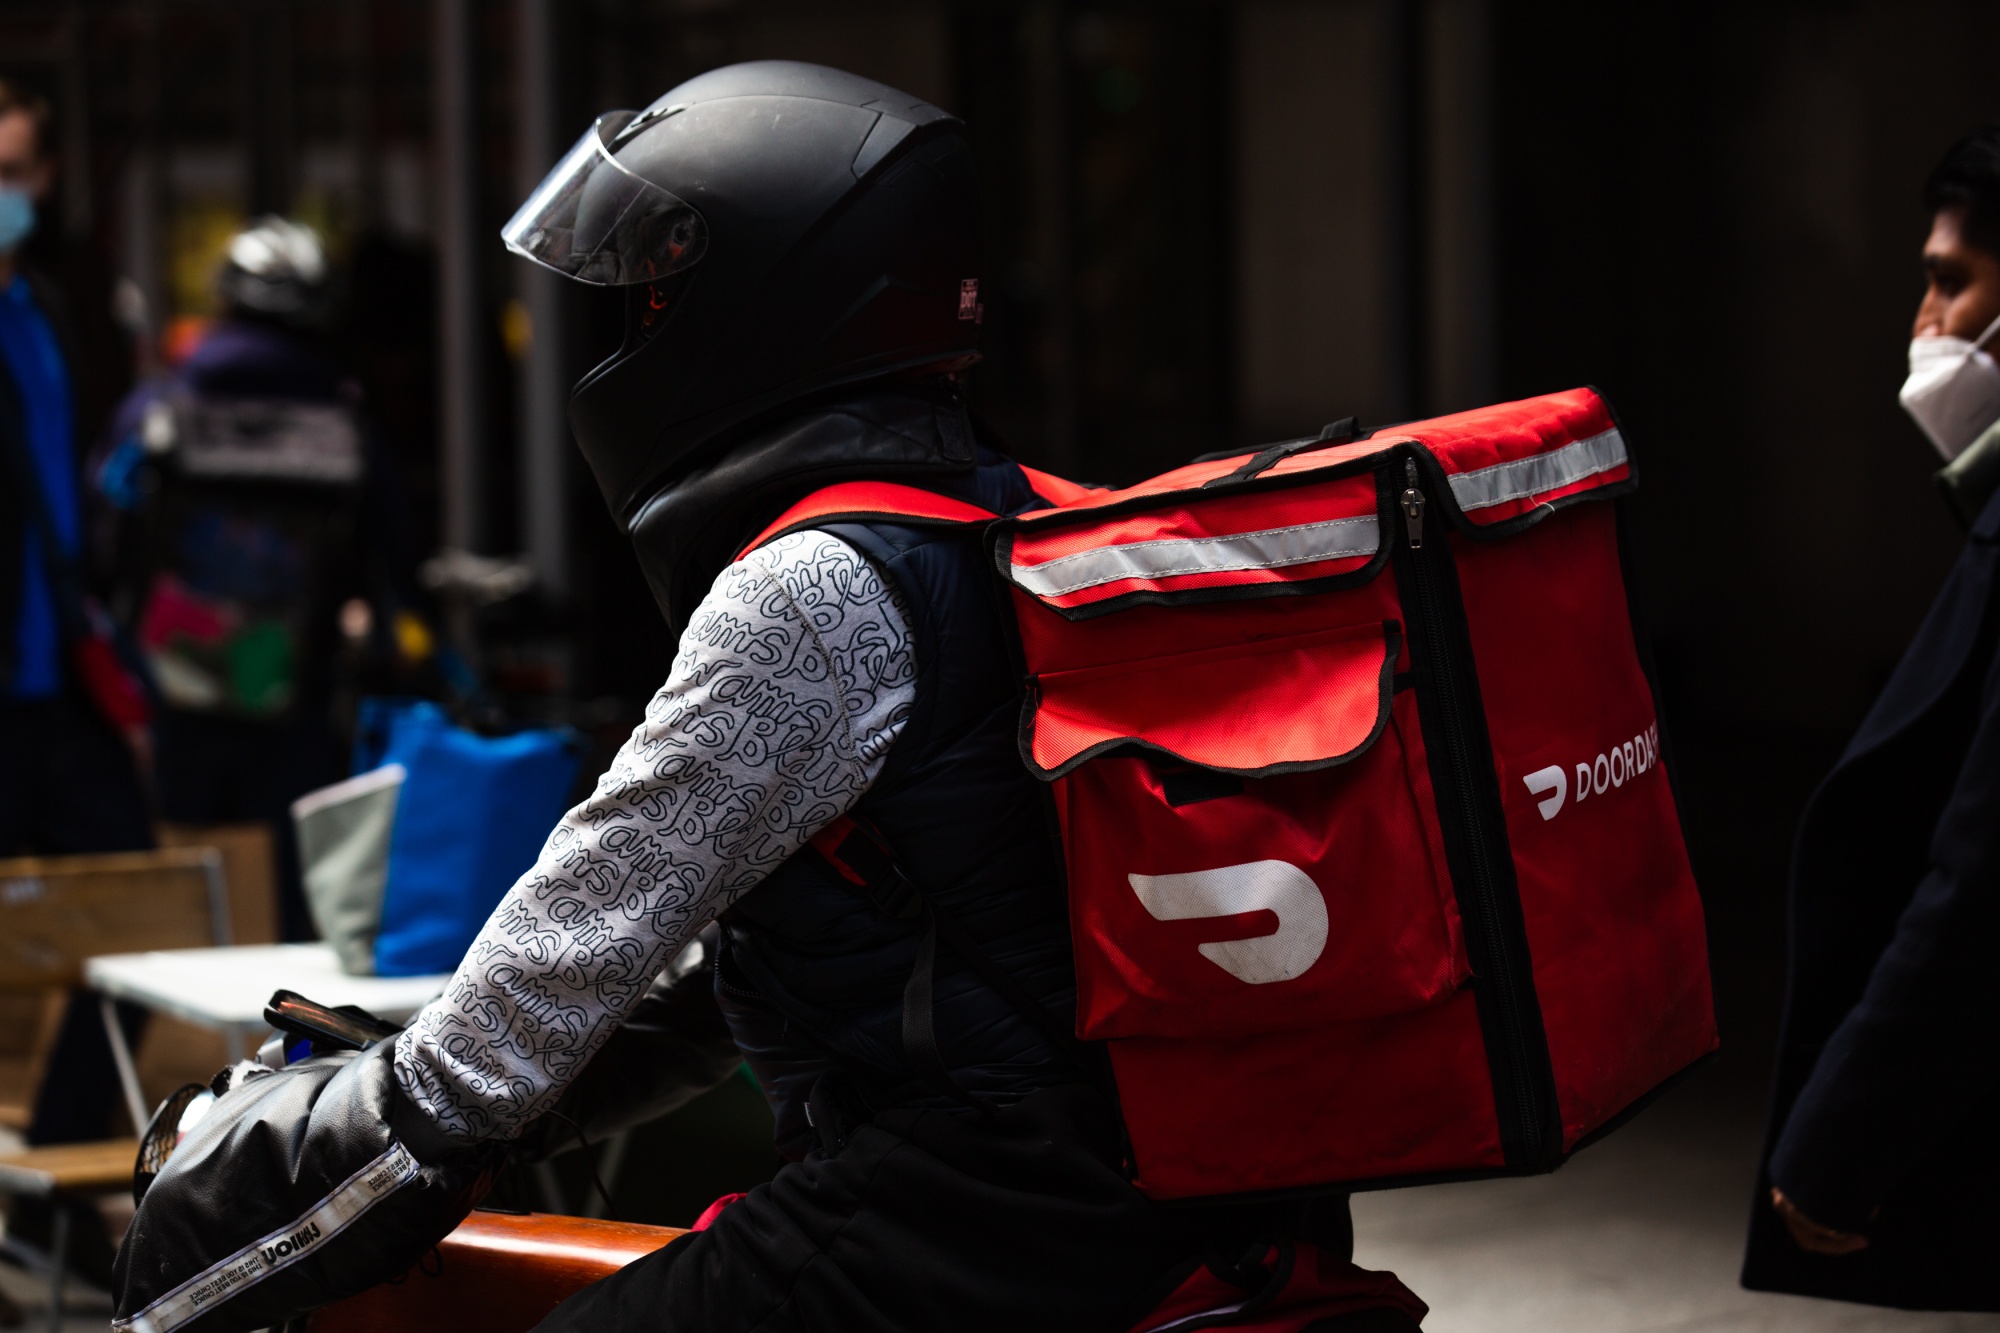 DoorDash makes major change to its delivery policy and certain